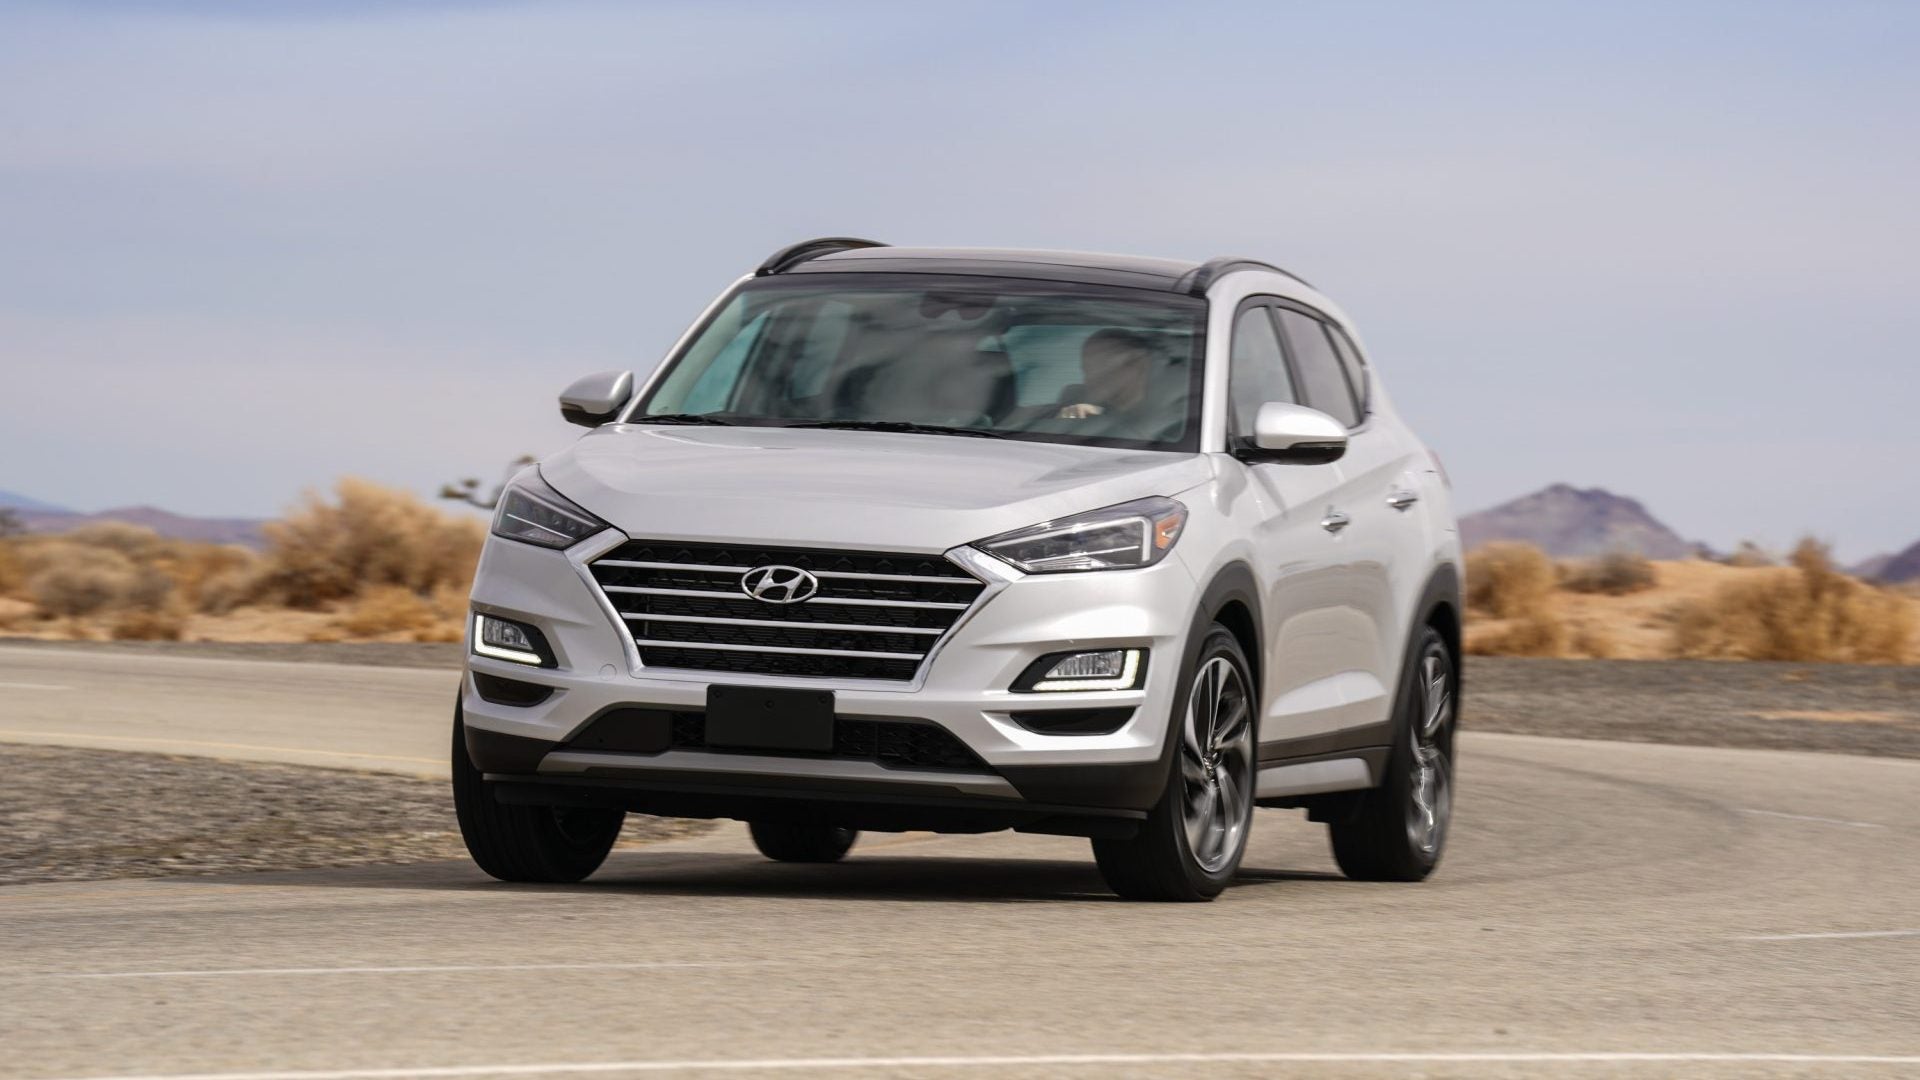 Hyundai Appears to Be Working on a 340-HP Tucson N Crossover: Report